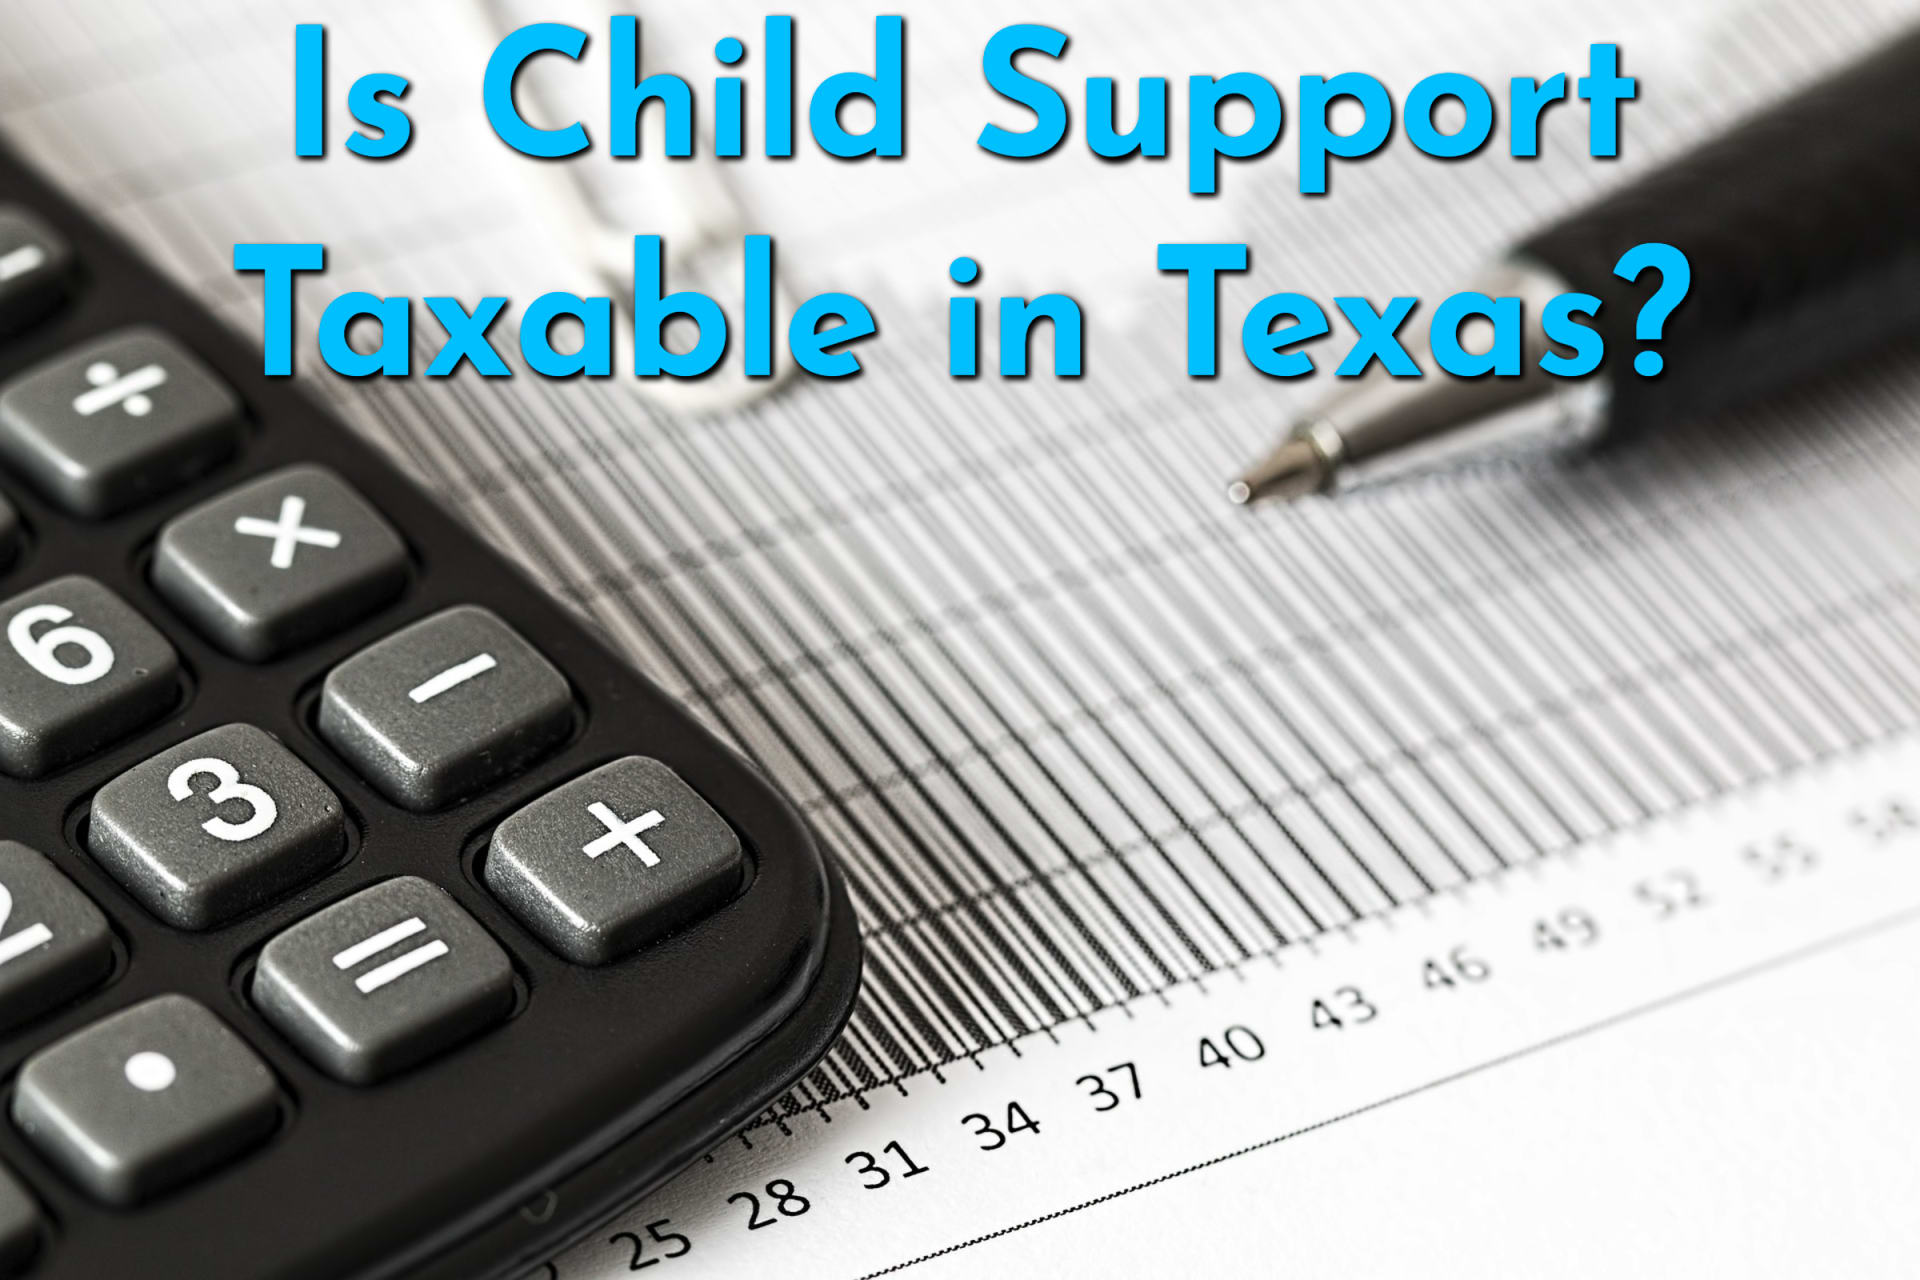 A calculator, spreadsheet, and pen for a parent trying to figure out is child support taxable